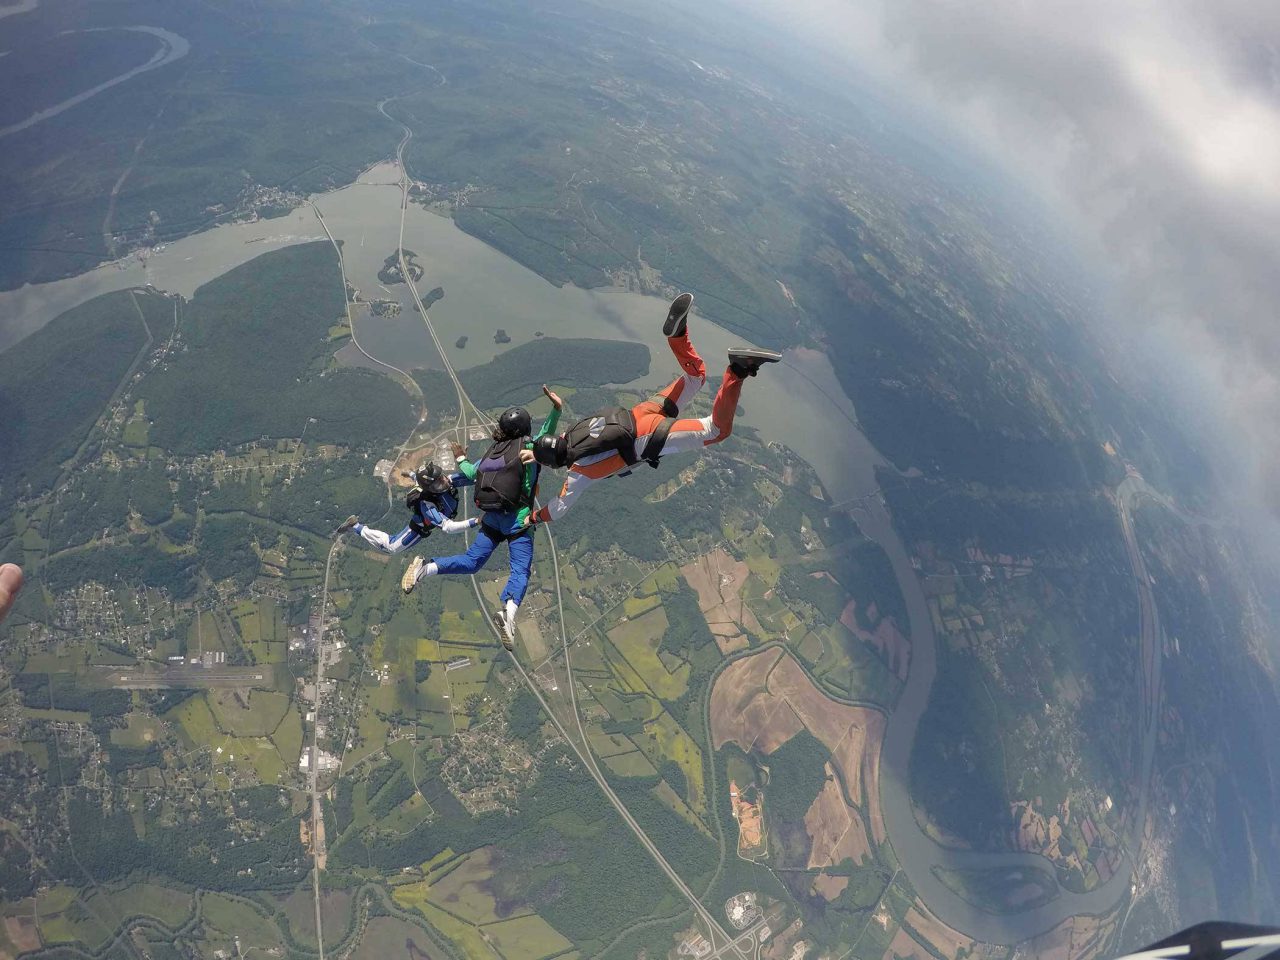 AFF student participating in hands on training while in free fall